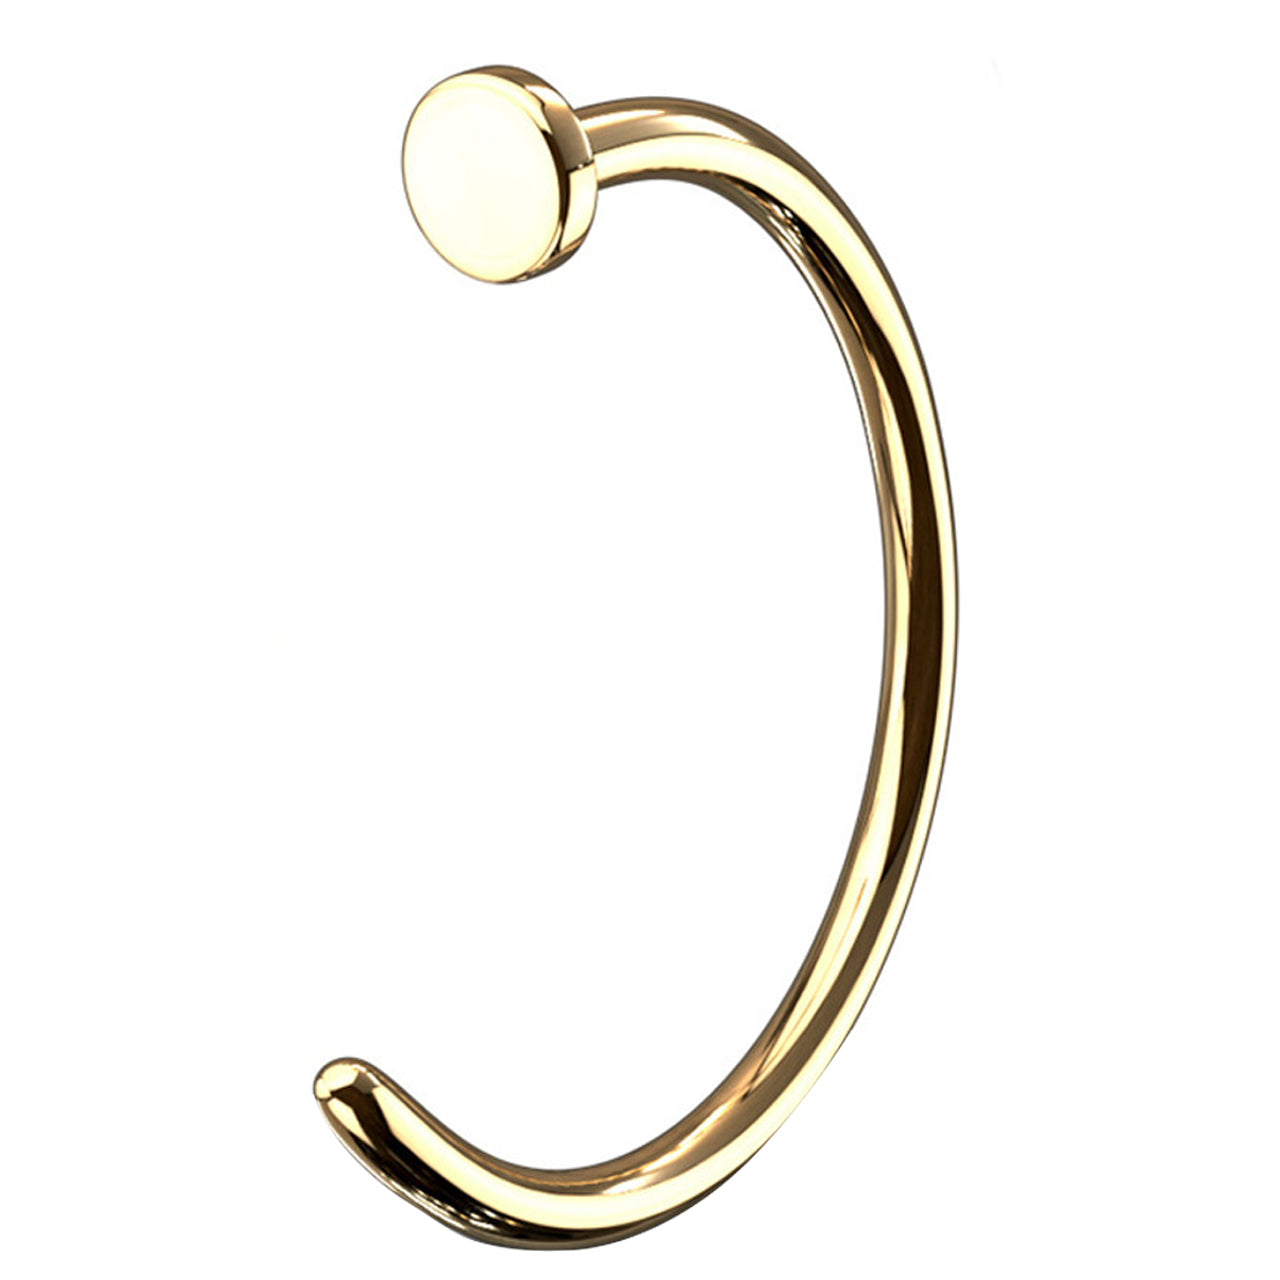 Titanium Anodized Nose Ring Hoop 18 Gauge - Gold or Rose Gold